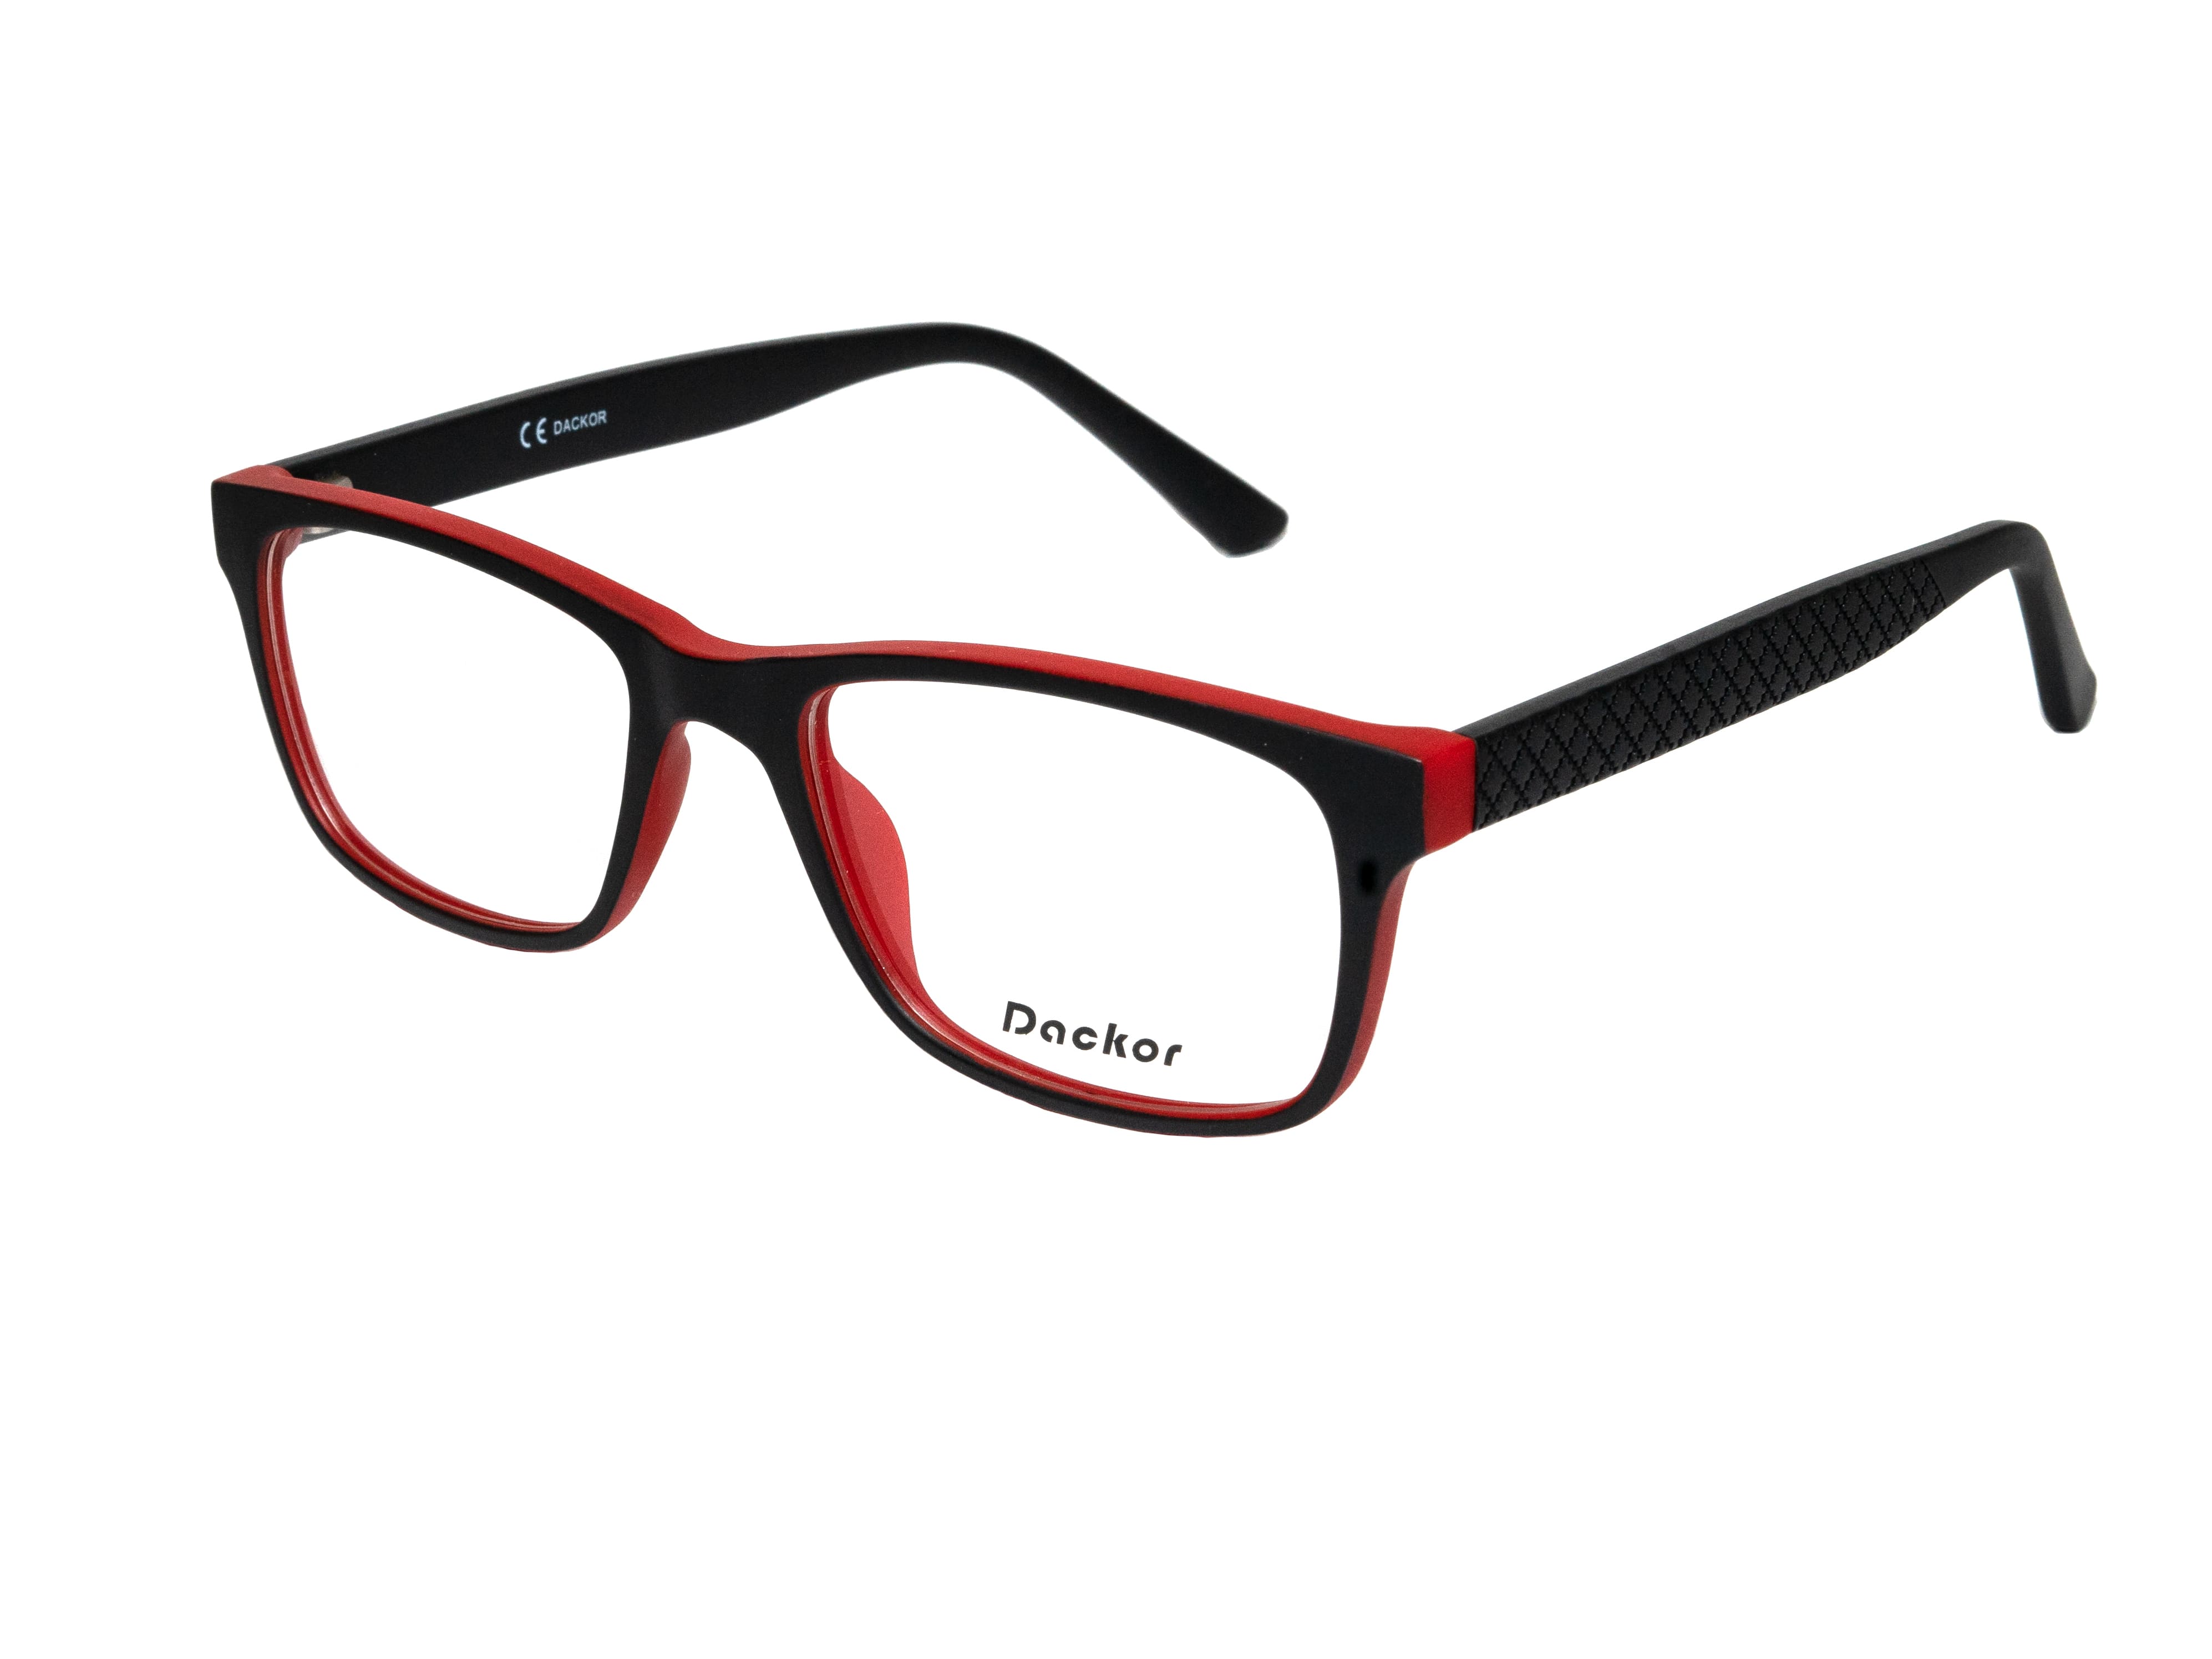 Dackor 635 red